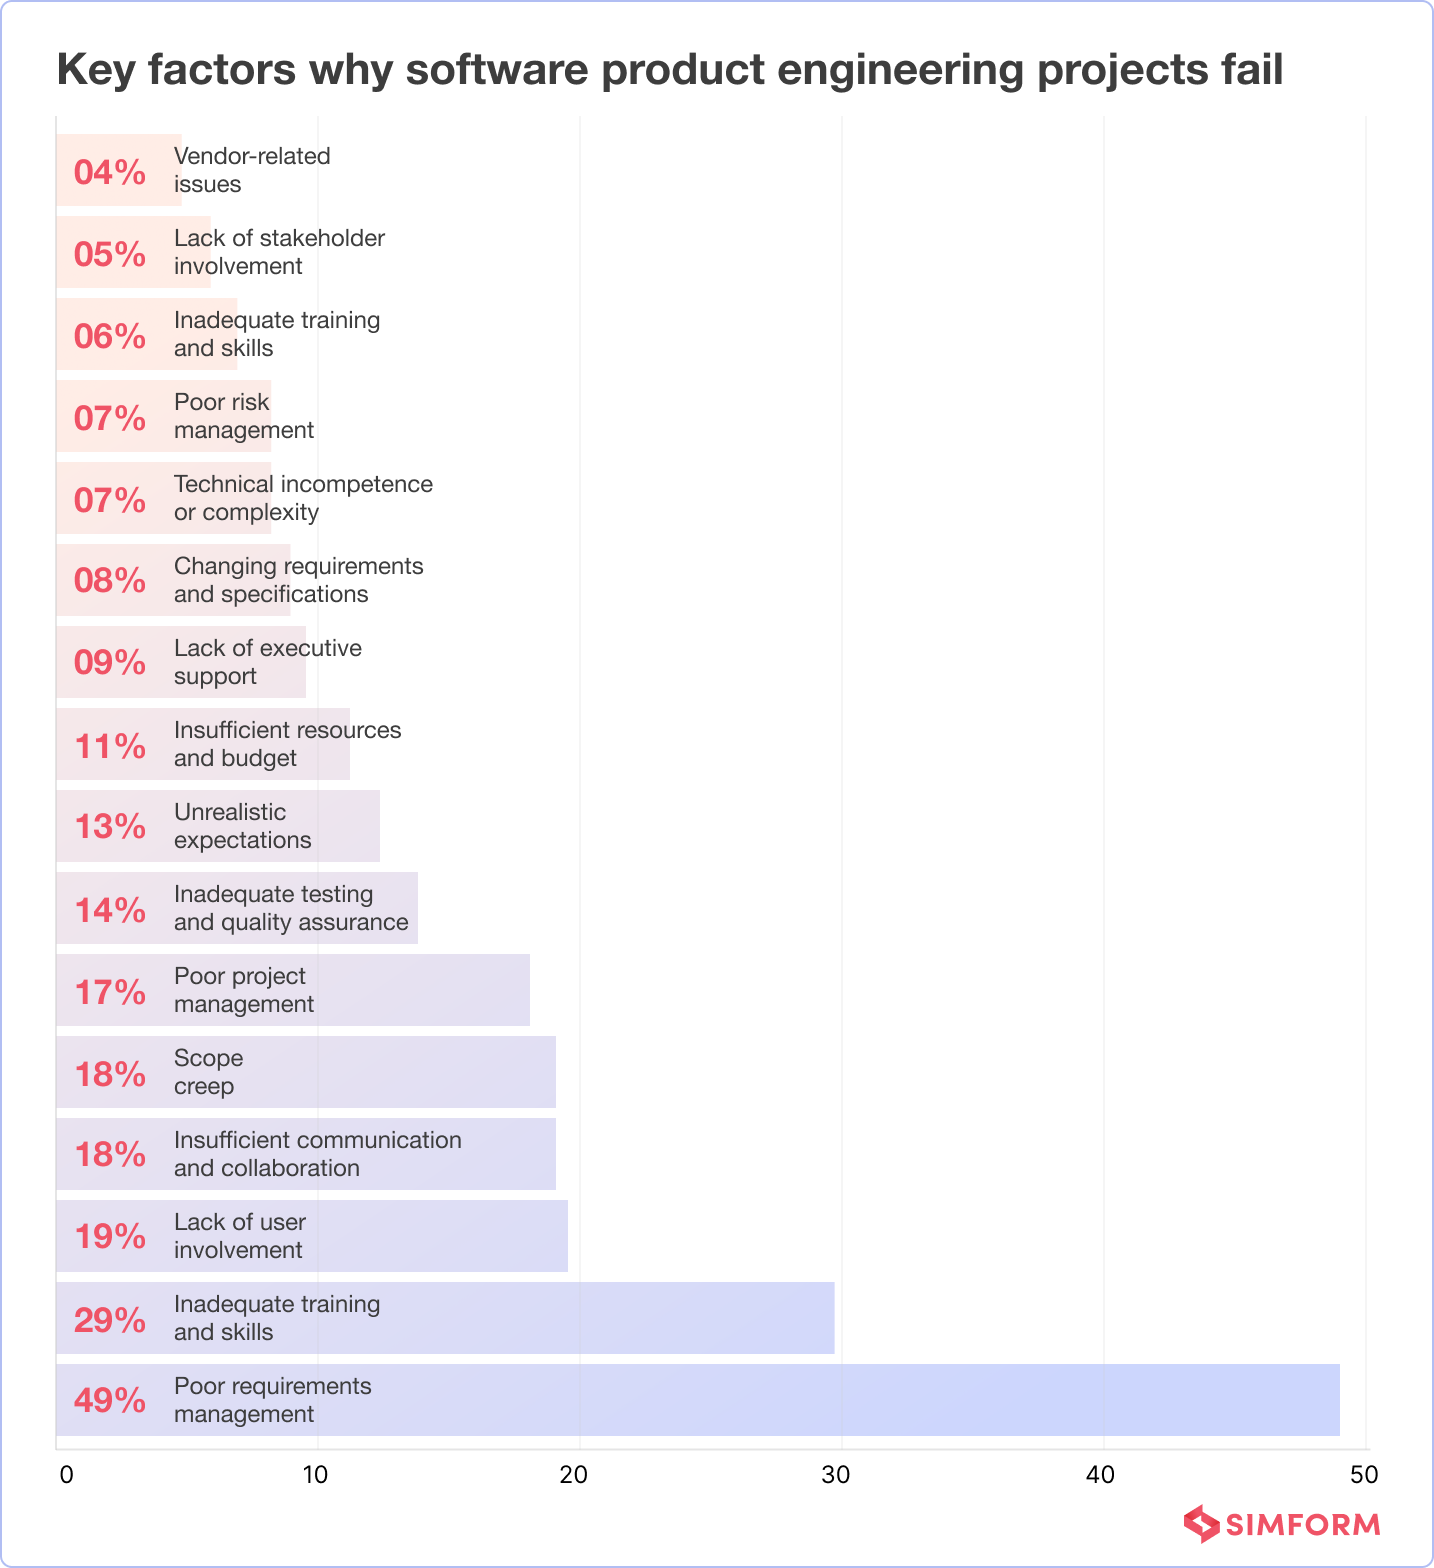 Key factors why software product engineeing projects fail